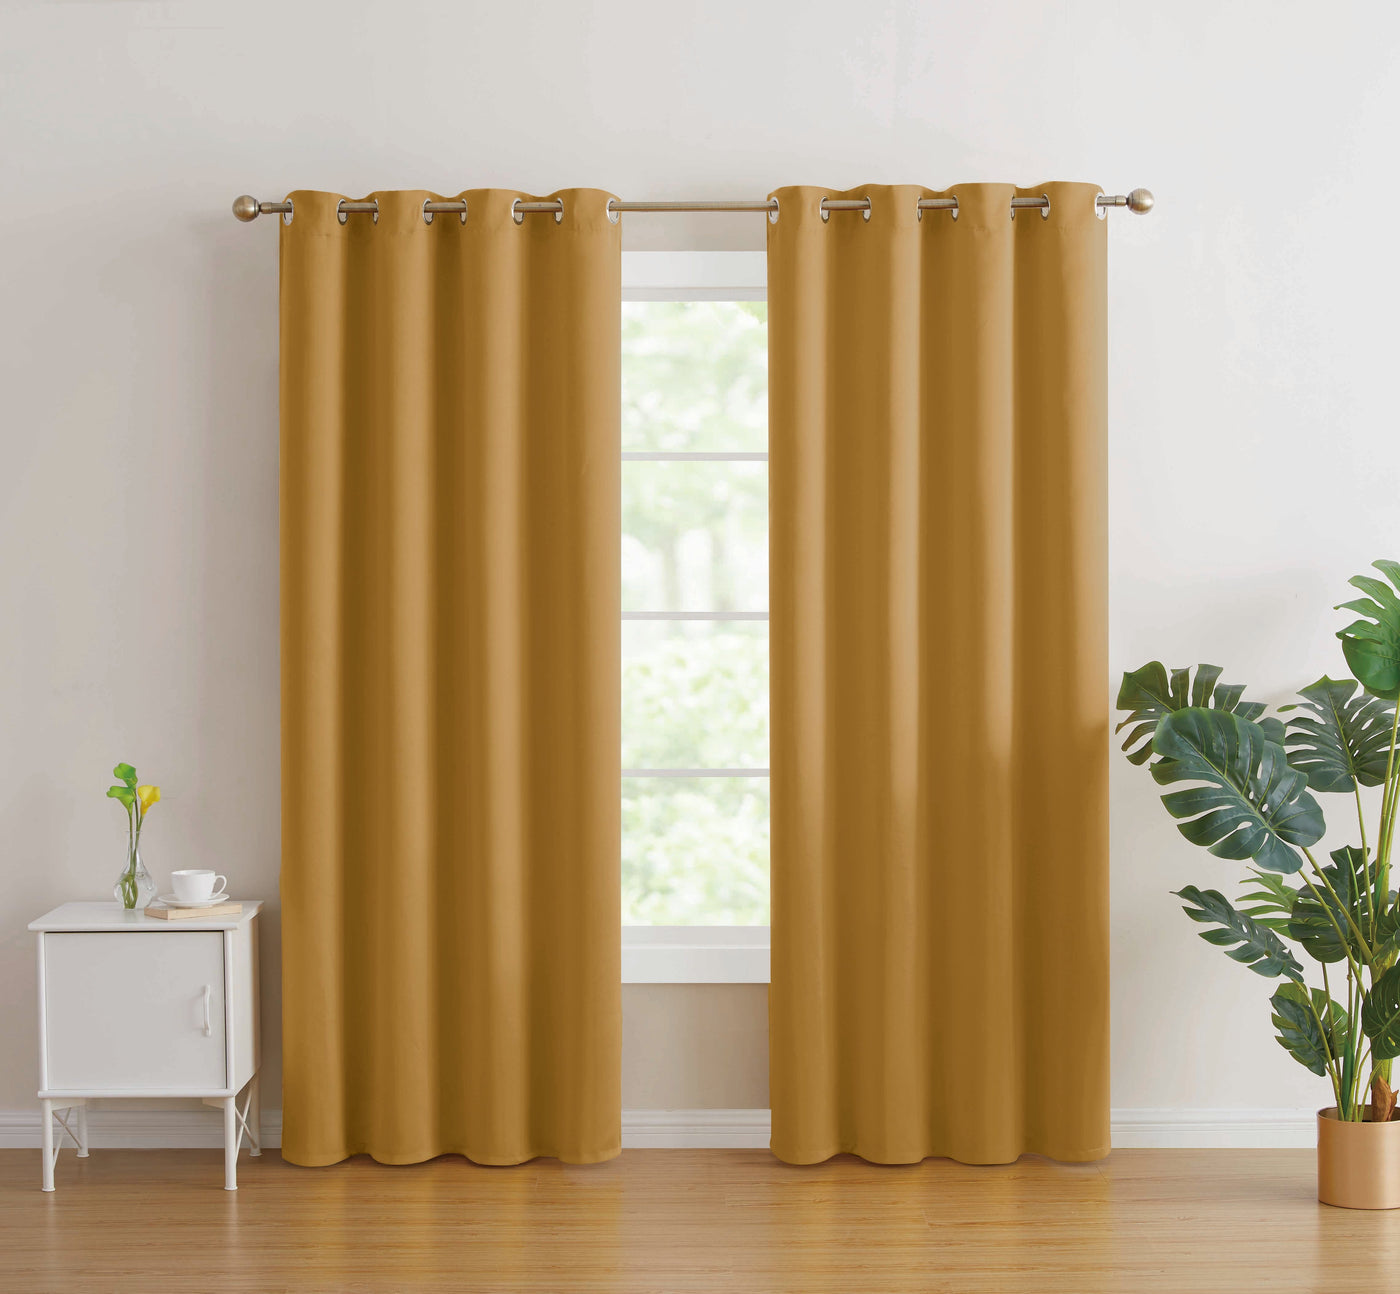 2pc Solid Grommet Thermal Insulated Window Curtain Panels Room Darkening Blackout 108" - Jenin-Home-Furnishing.CURTAINS